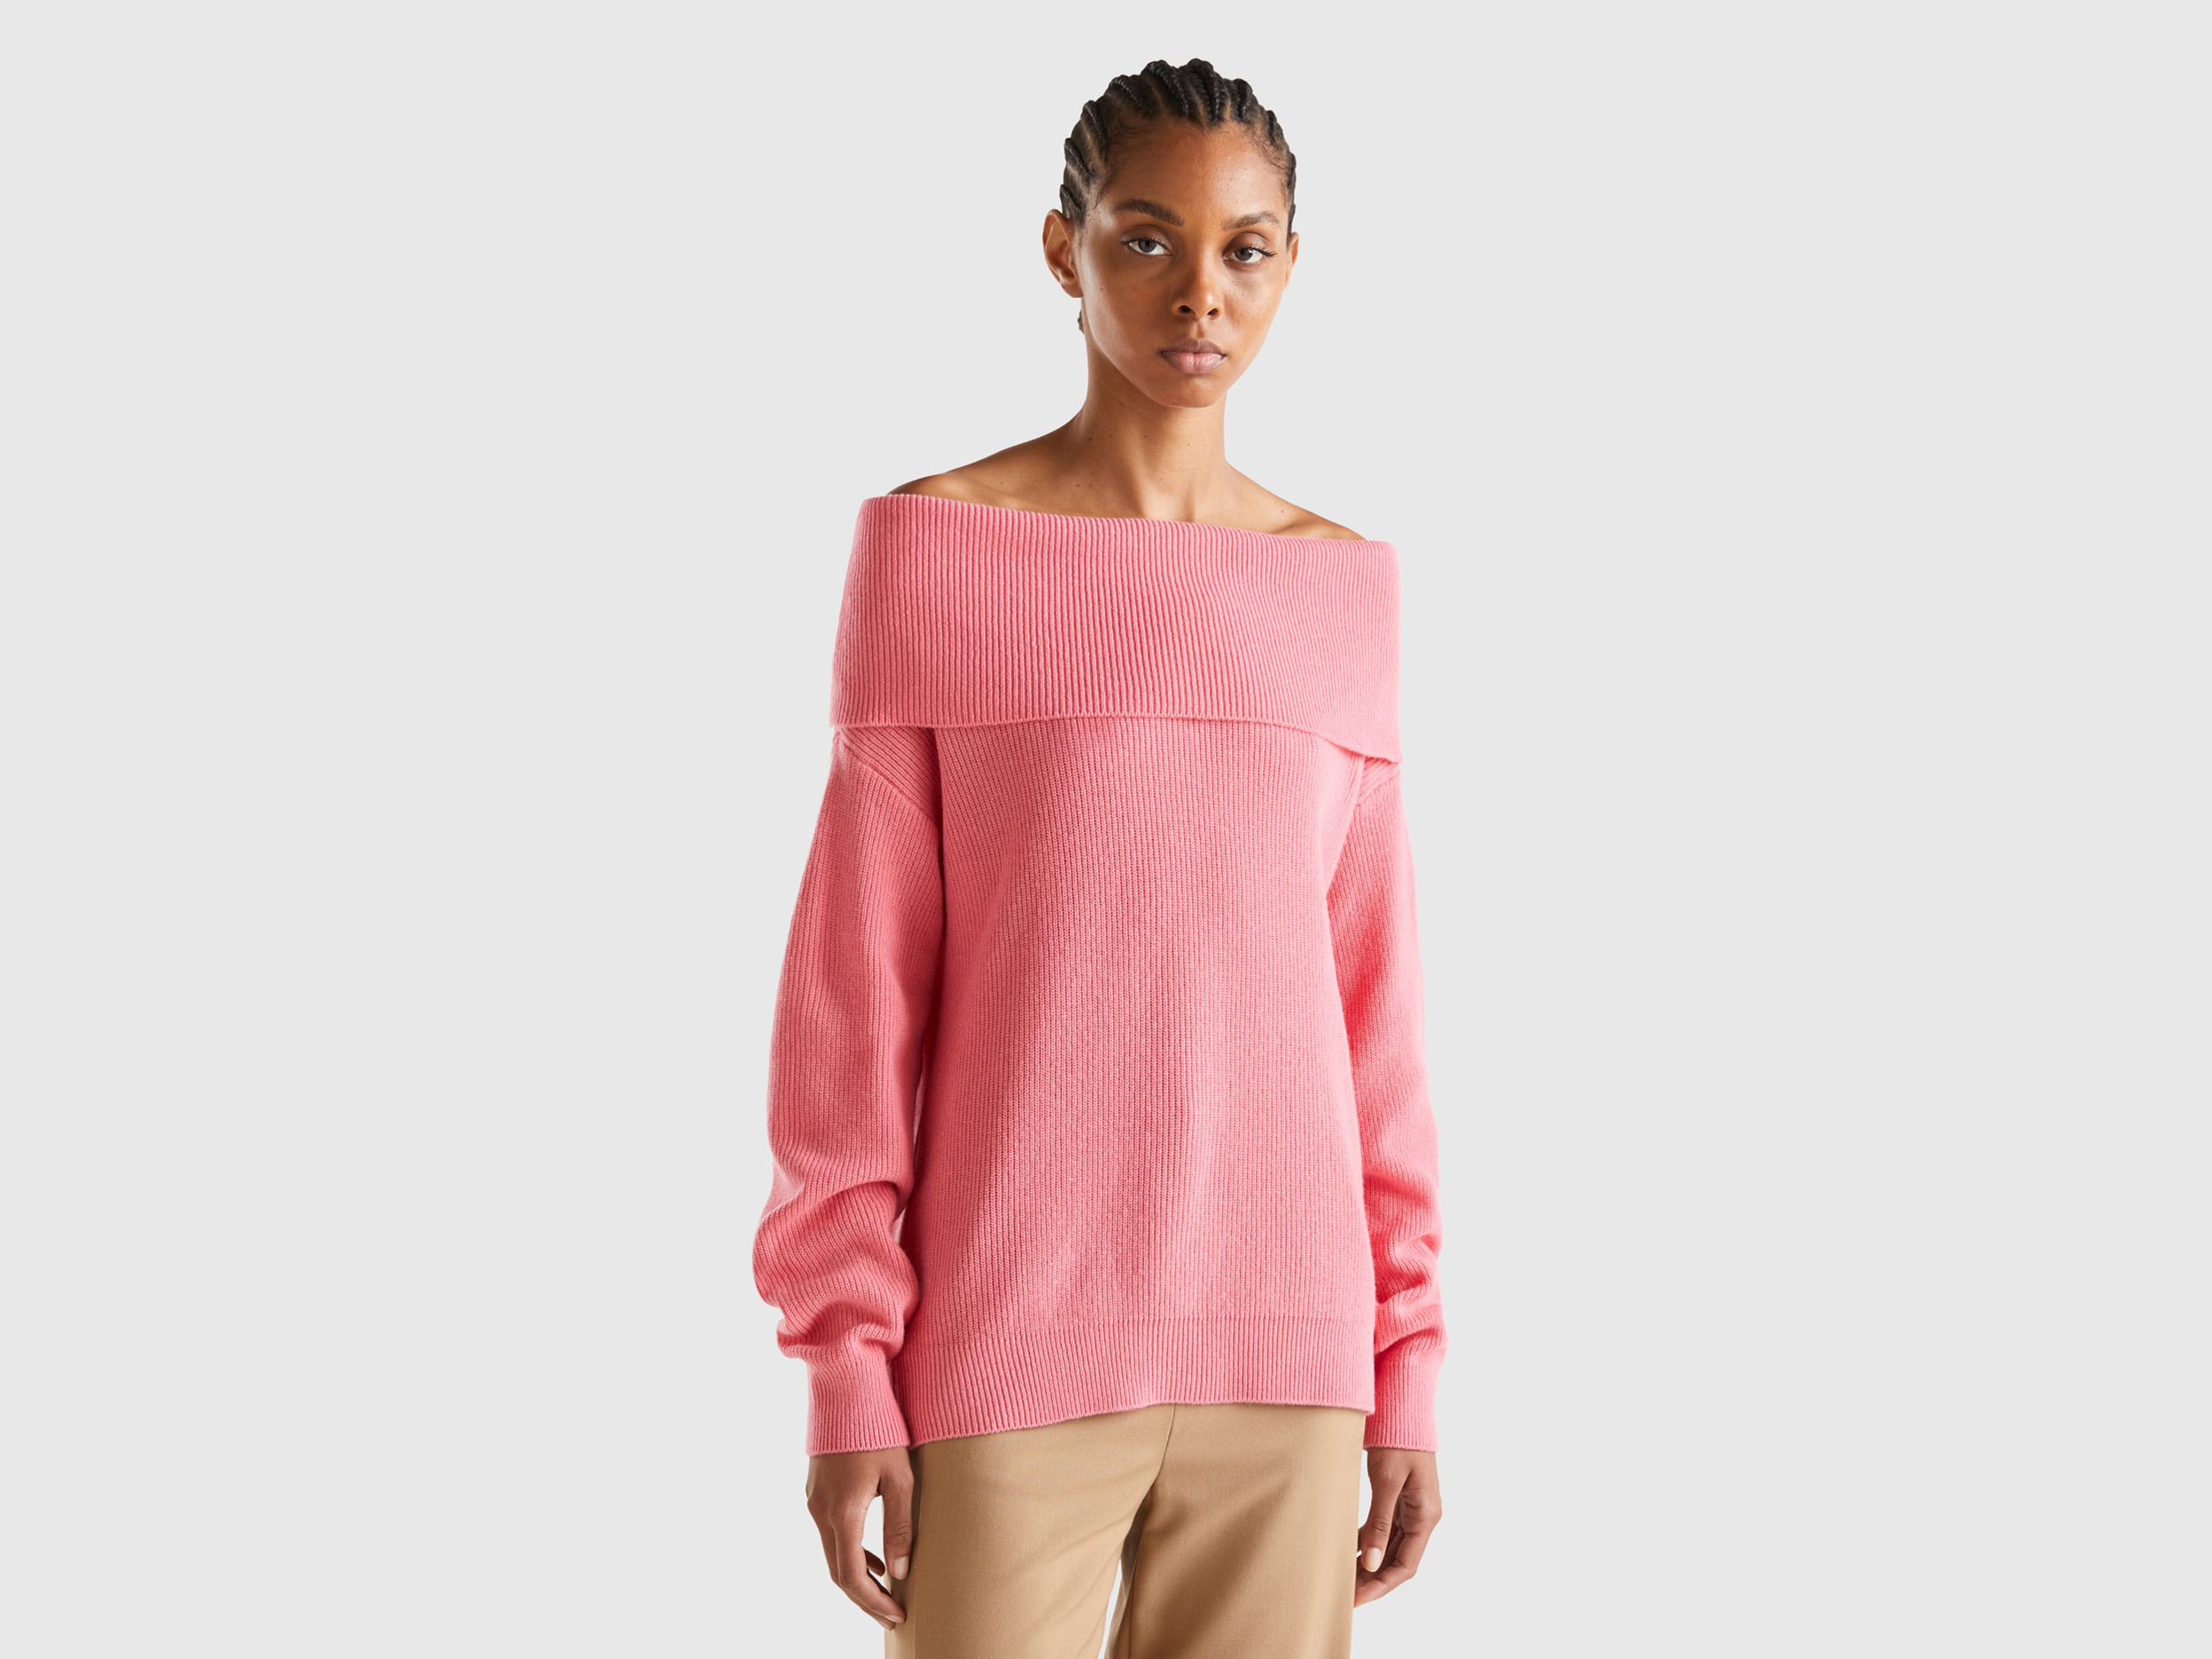 Benetton, Sweater With Bare Shoulders, size M, Salmon, Women